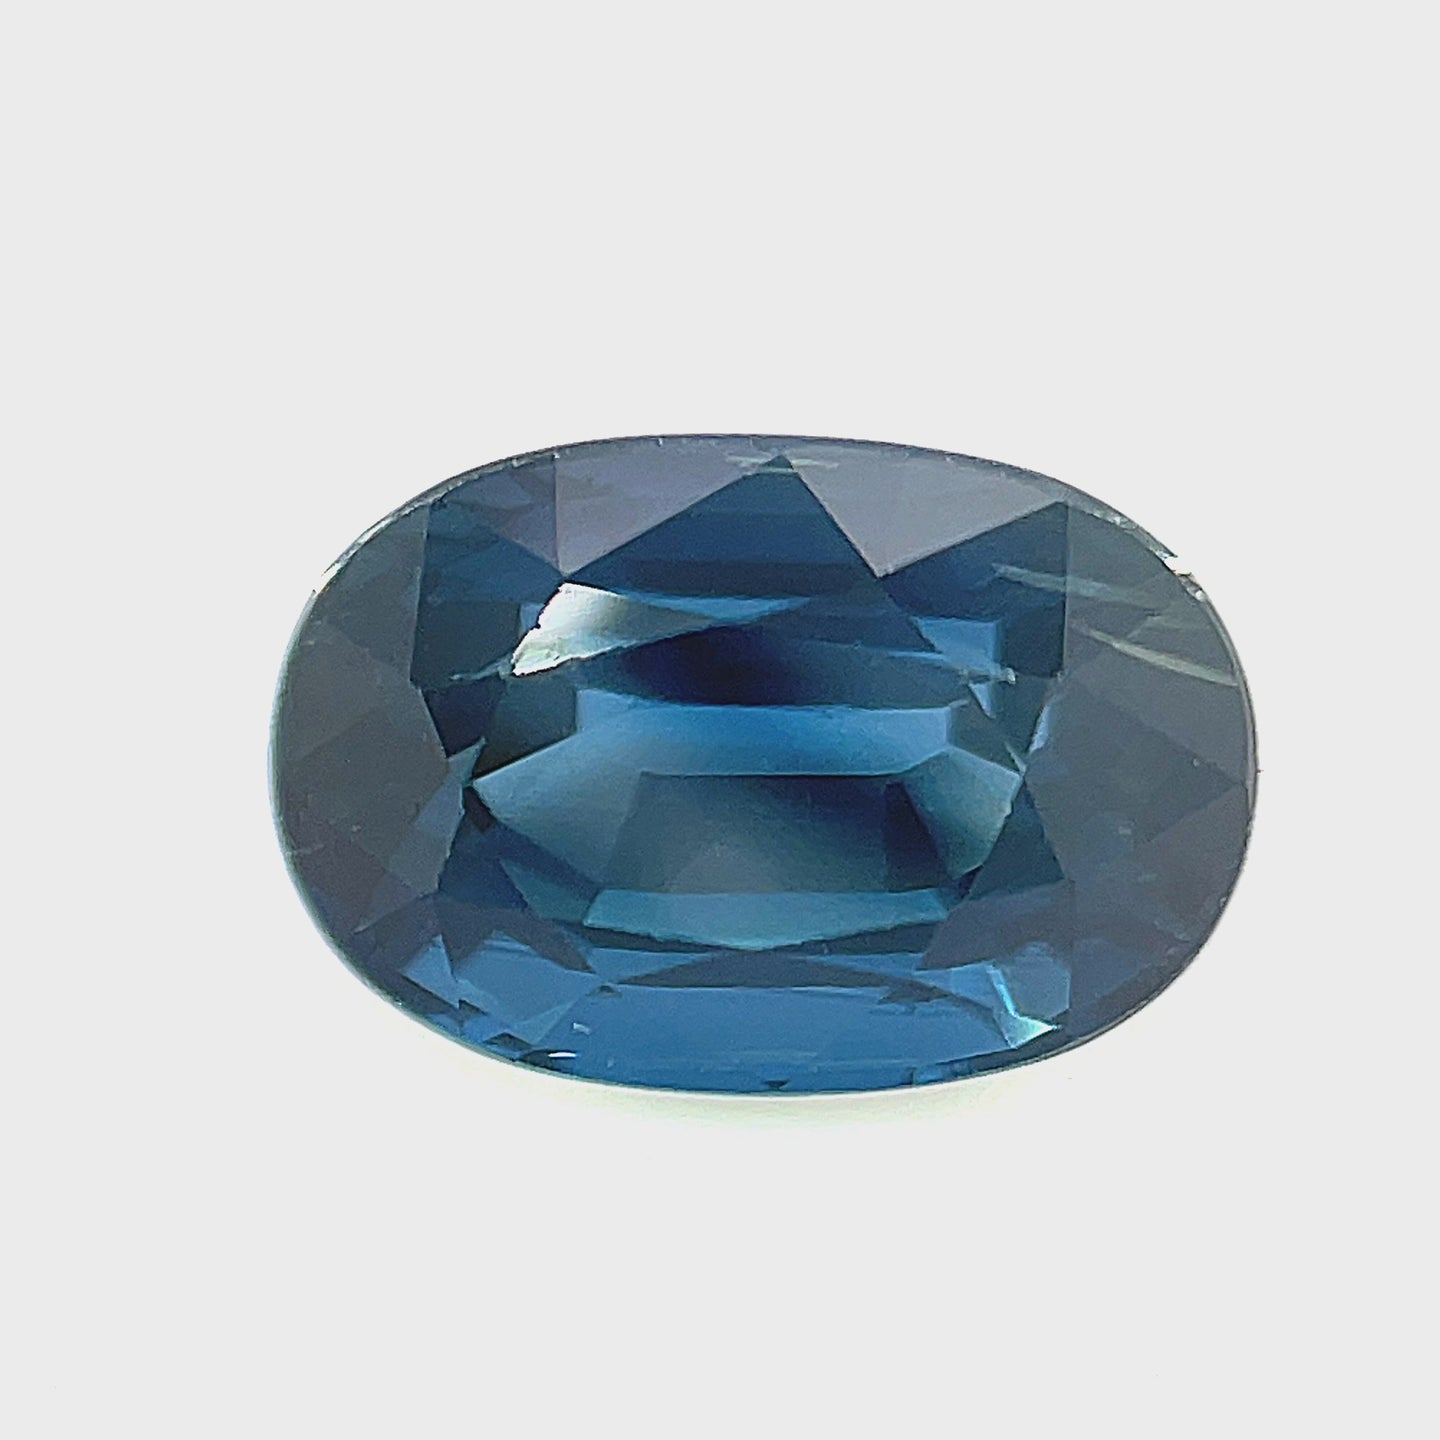 4.26 ct. GIA Certified Oval Deep Blue Sapphire